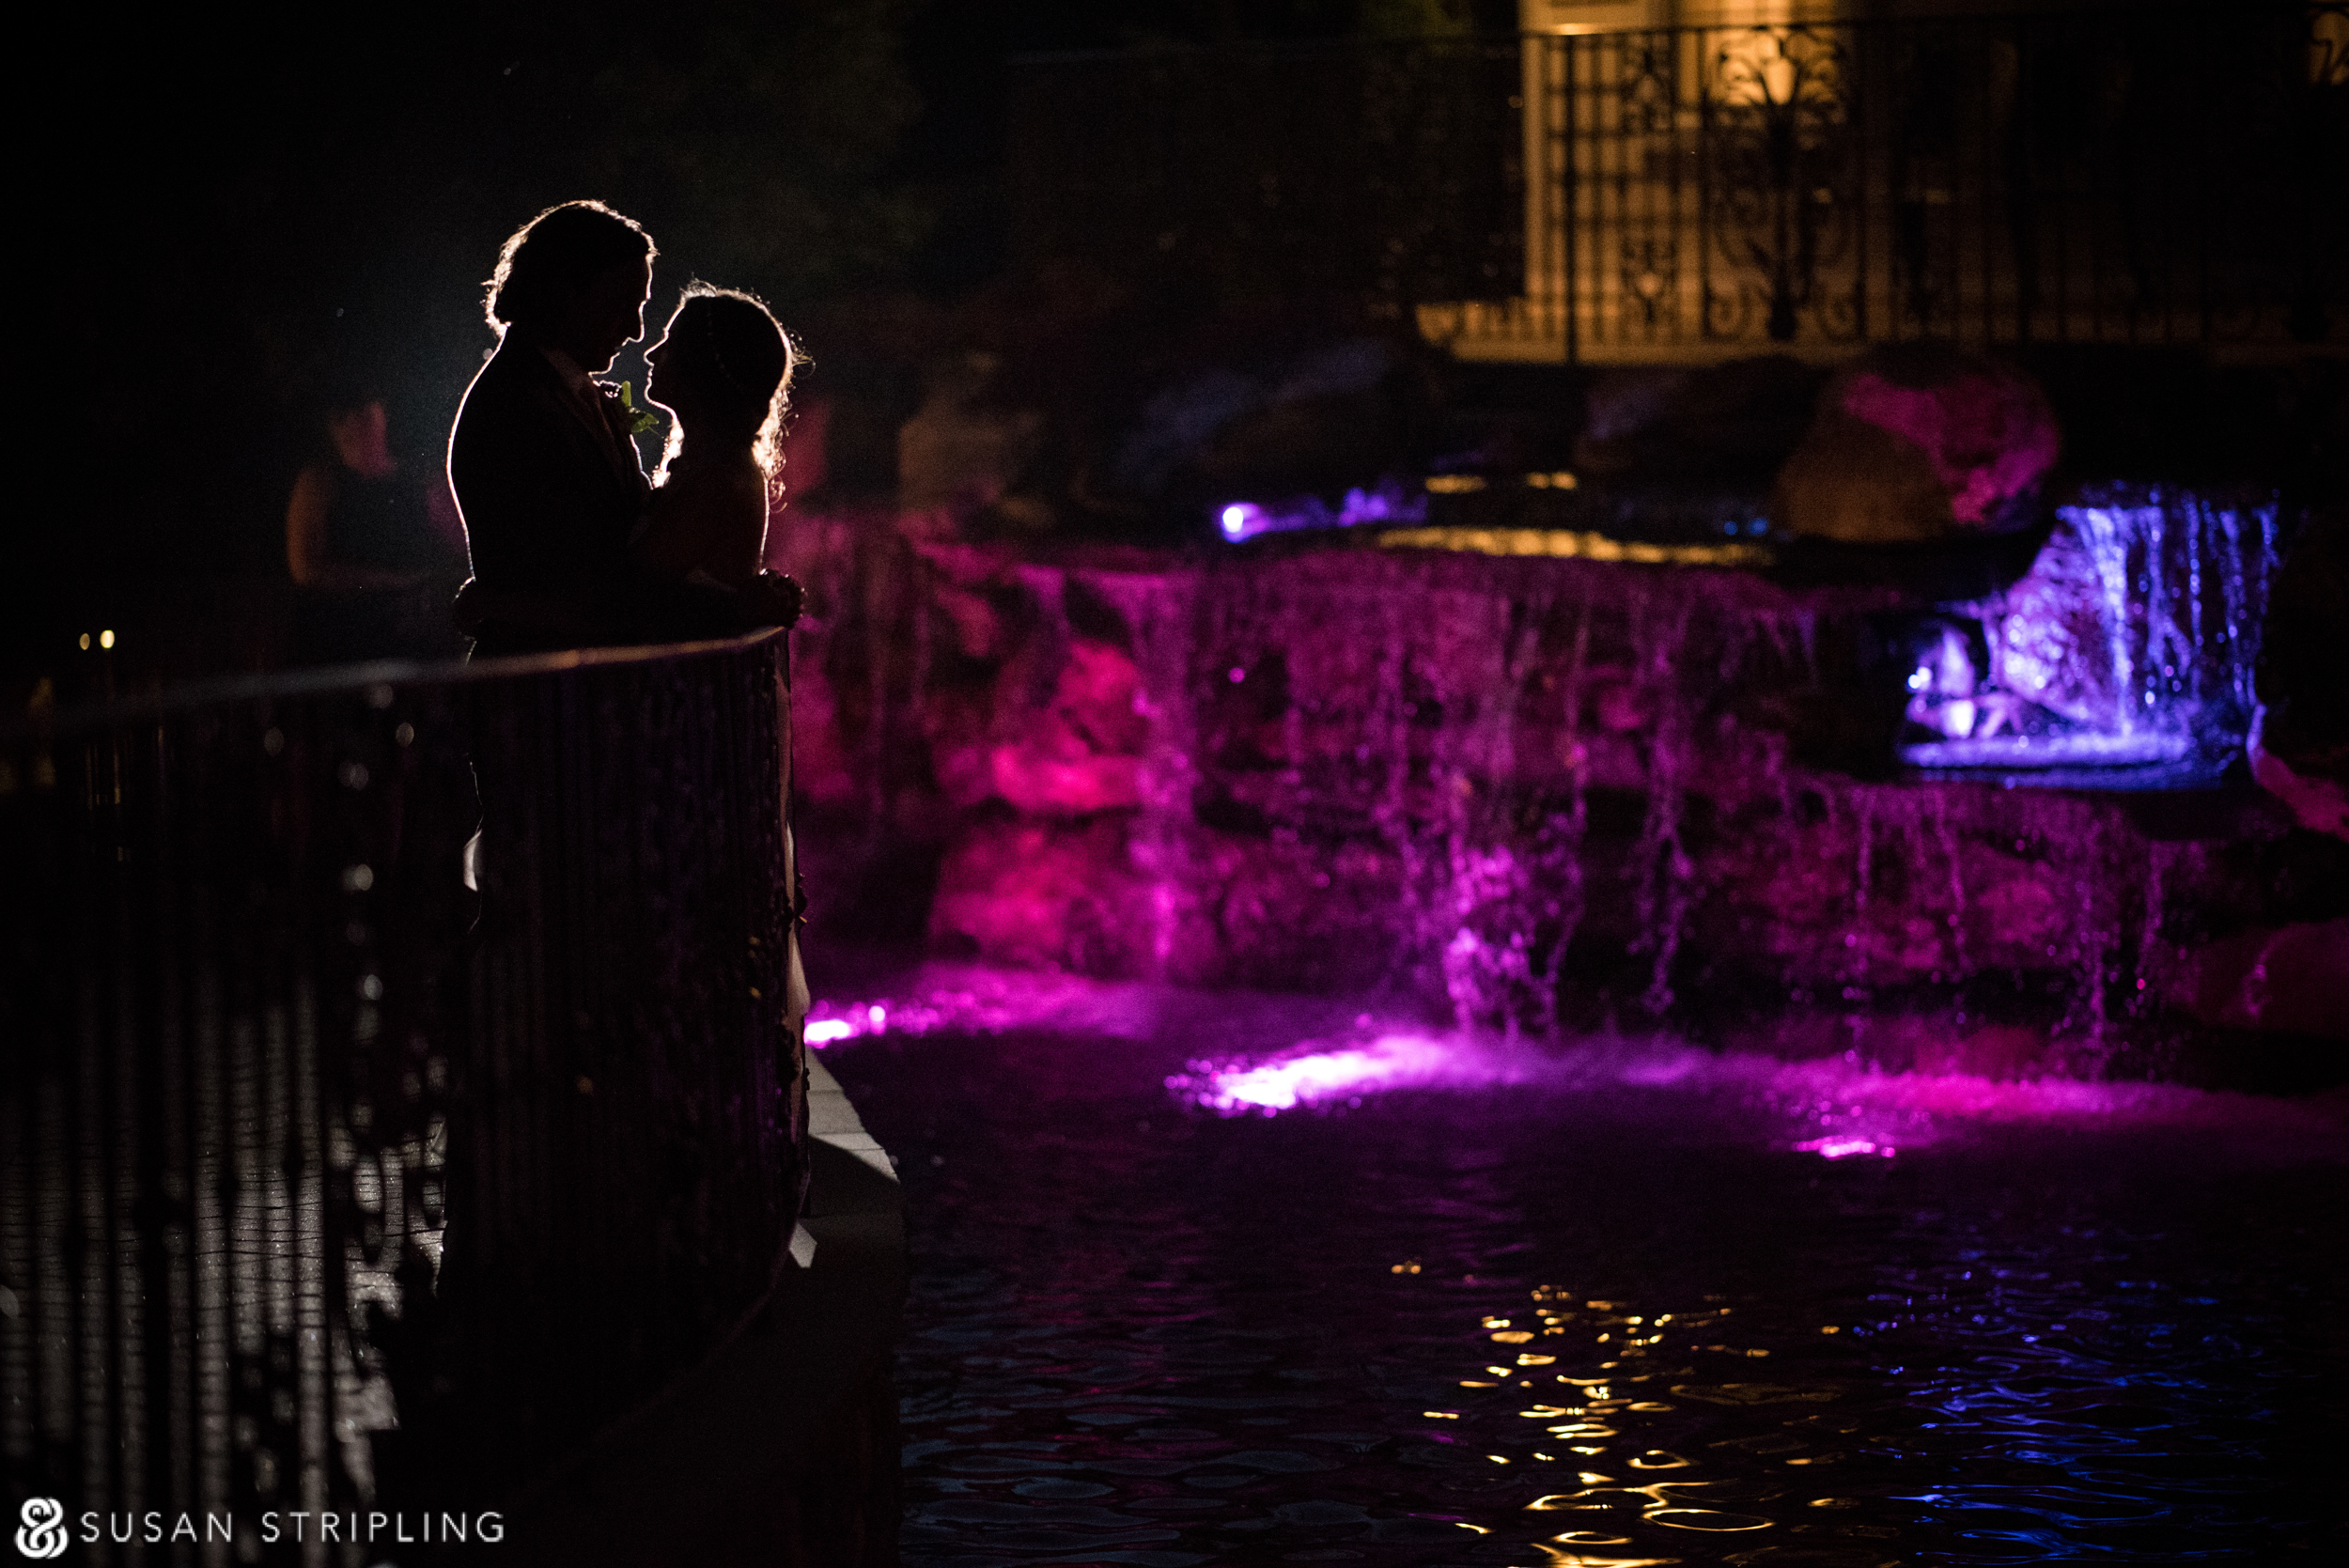 A summer wedding at the West Hills Country Club, with the bride and groom standing in front of a waterfall at night.